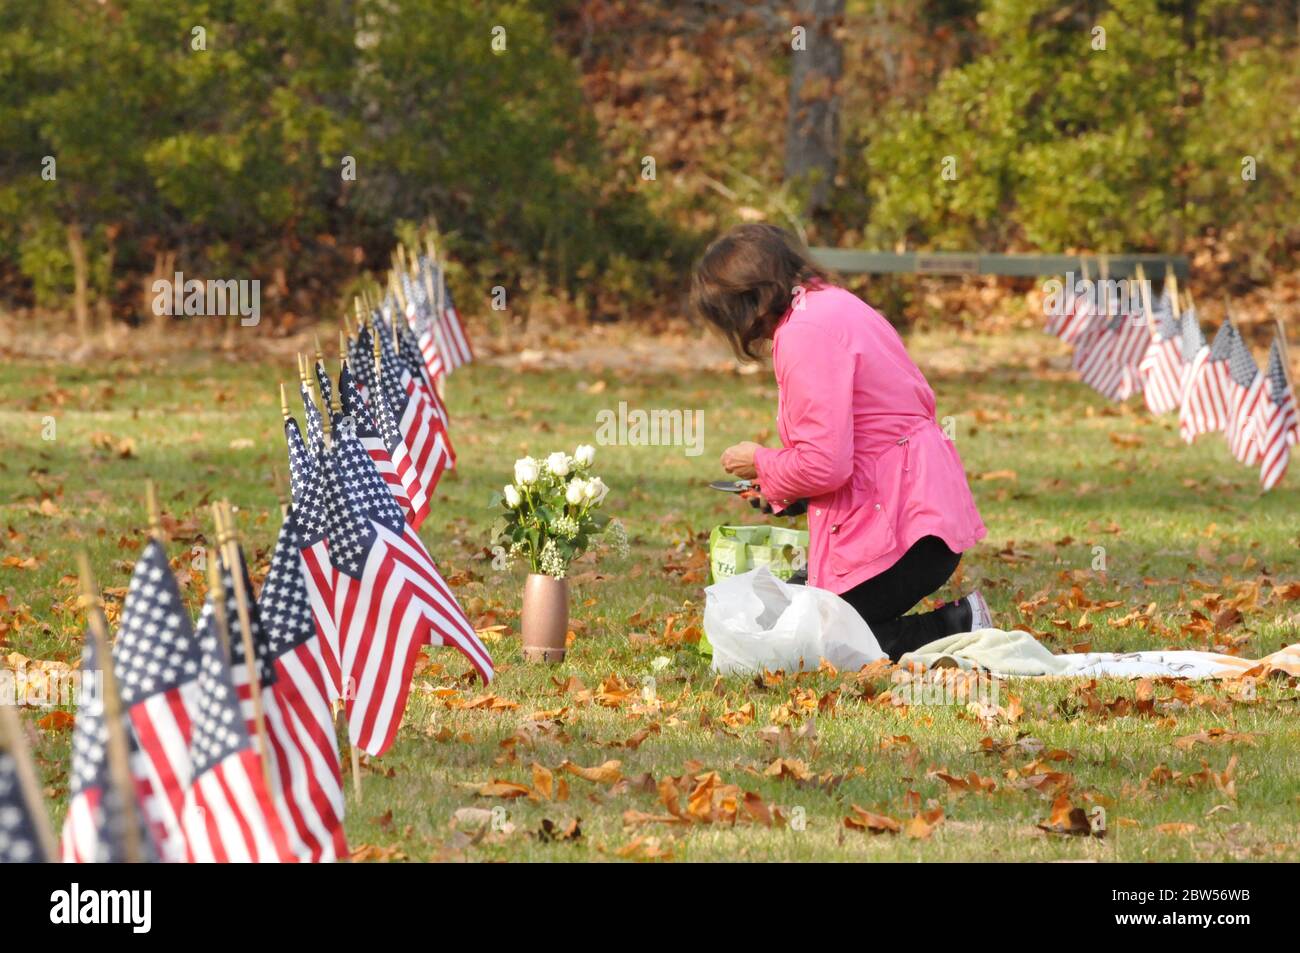 On Memorial Day, a woman places flowers on a loved one's grave with American flags on all the graves. Stock Photo